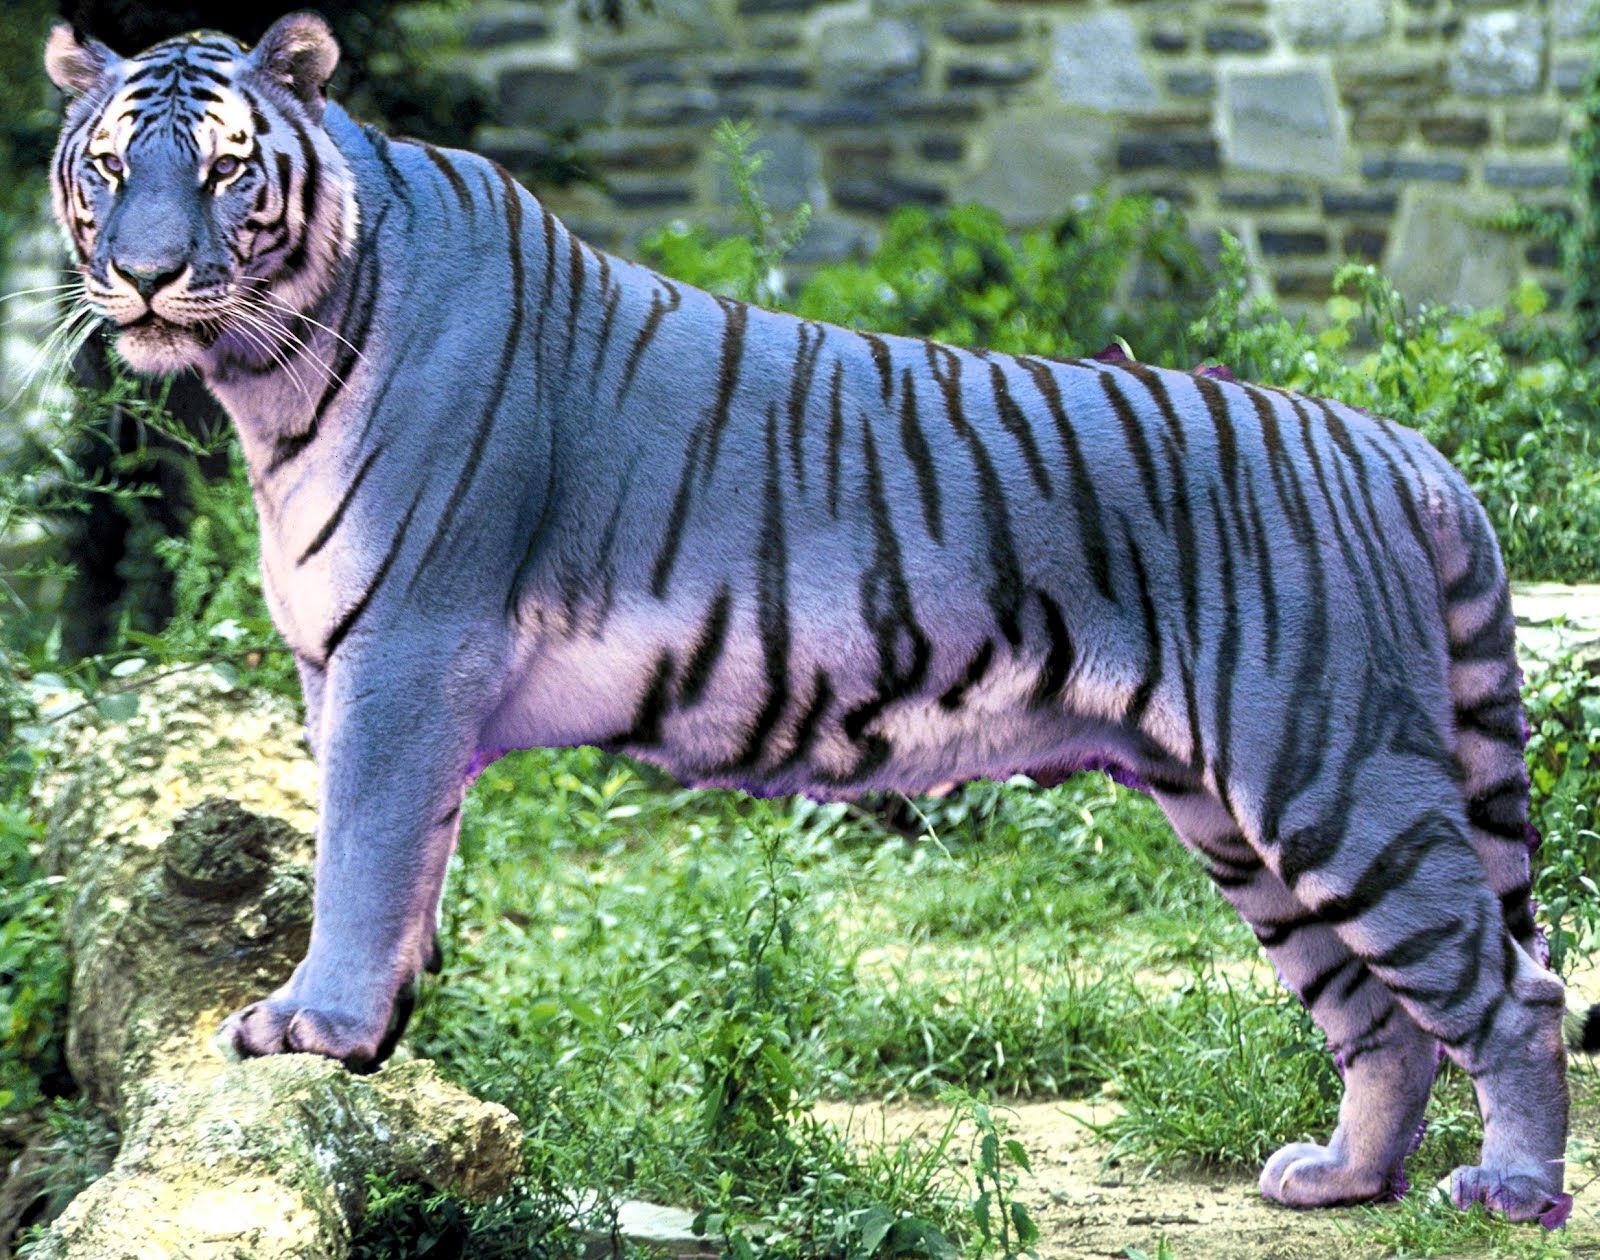 where does the maltese tiger live?